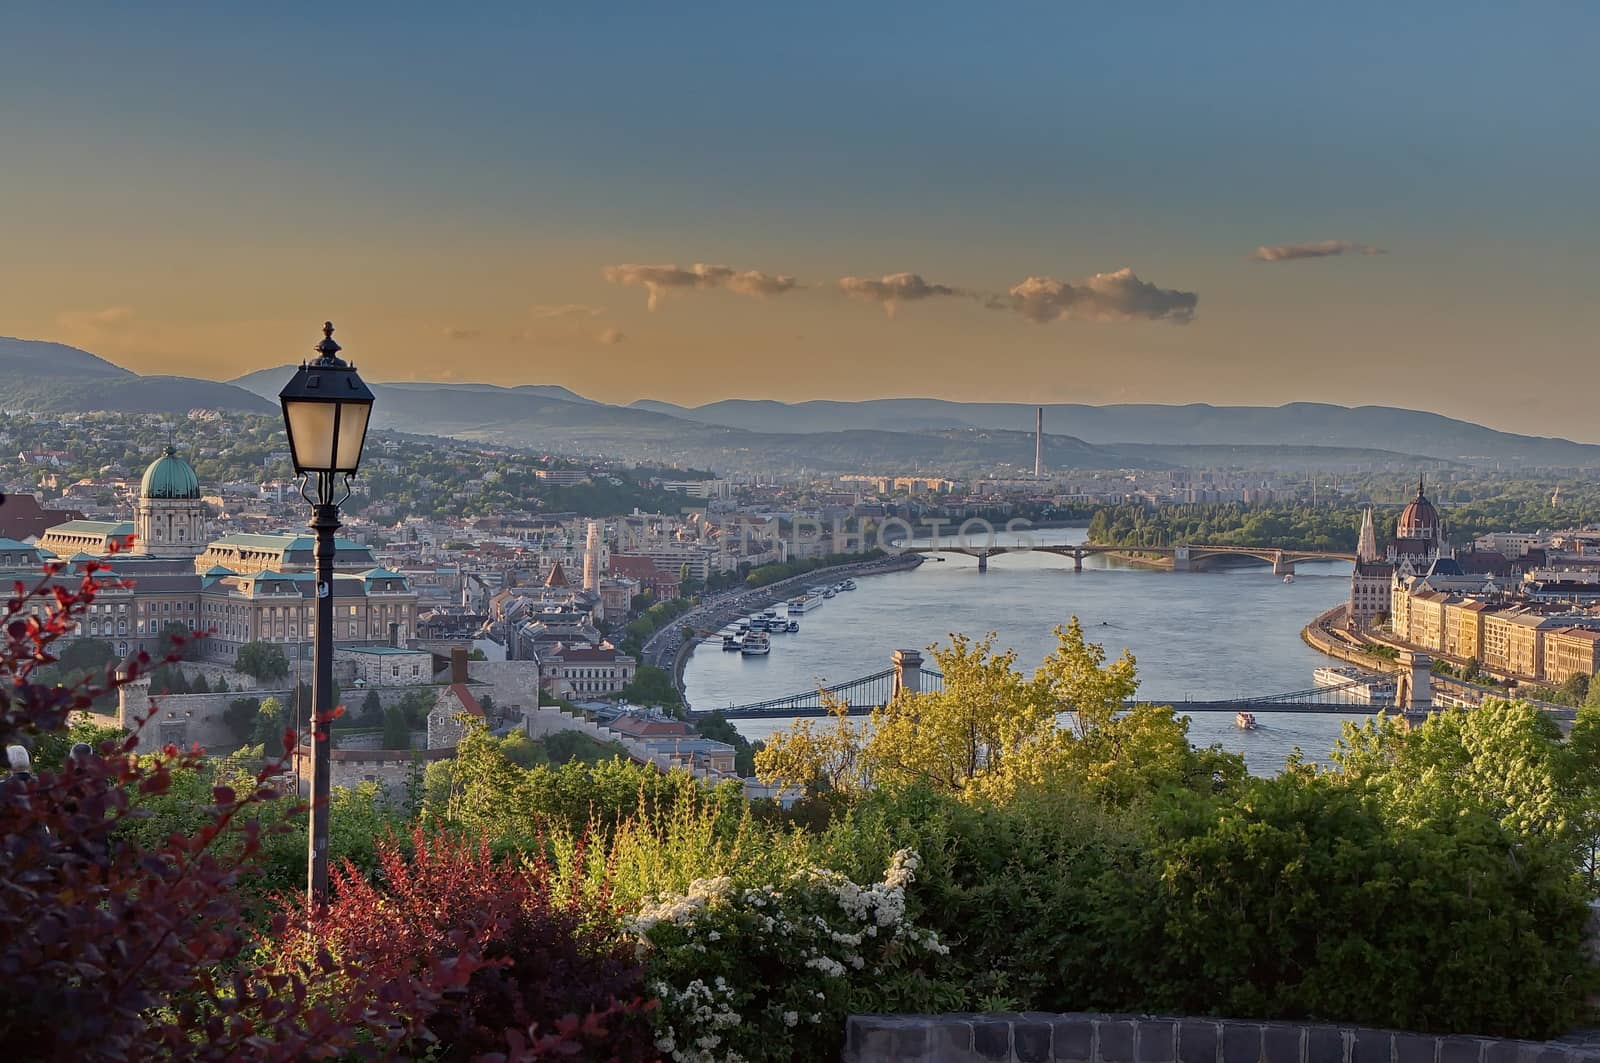 Budapest scene at dusk by anderm